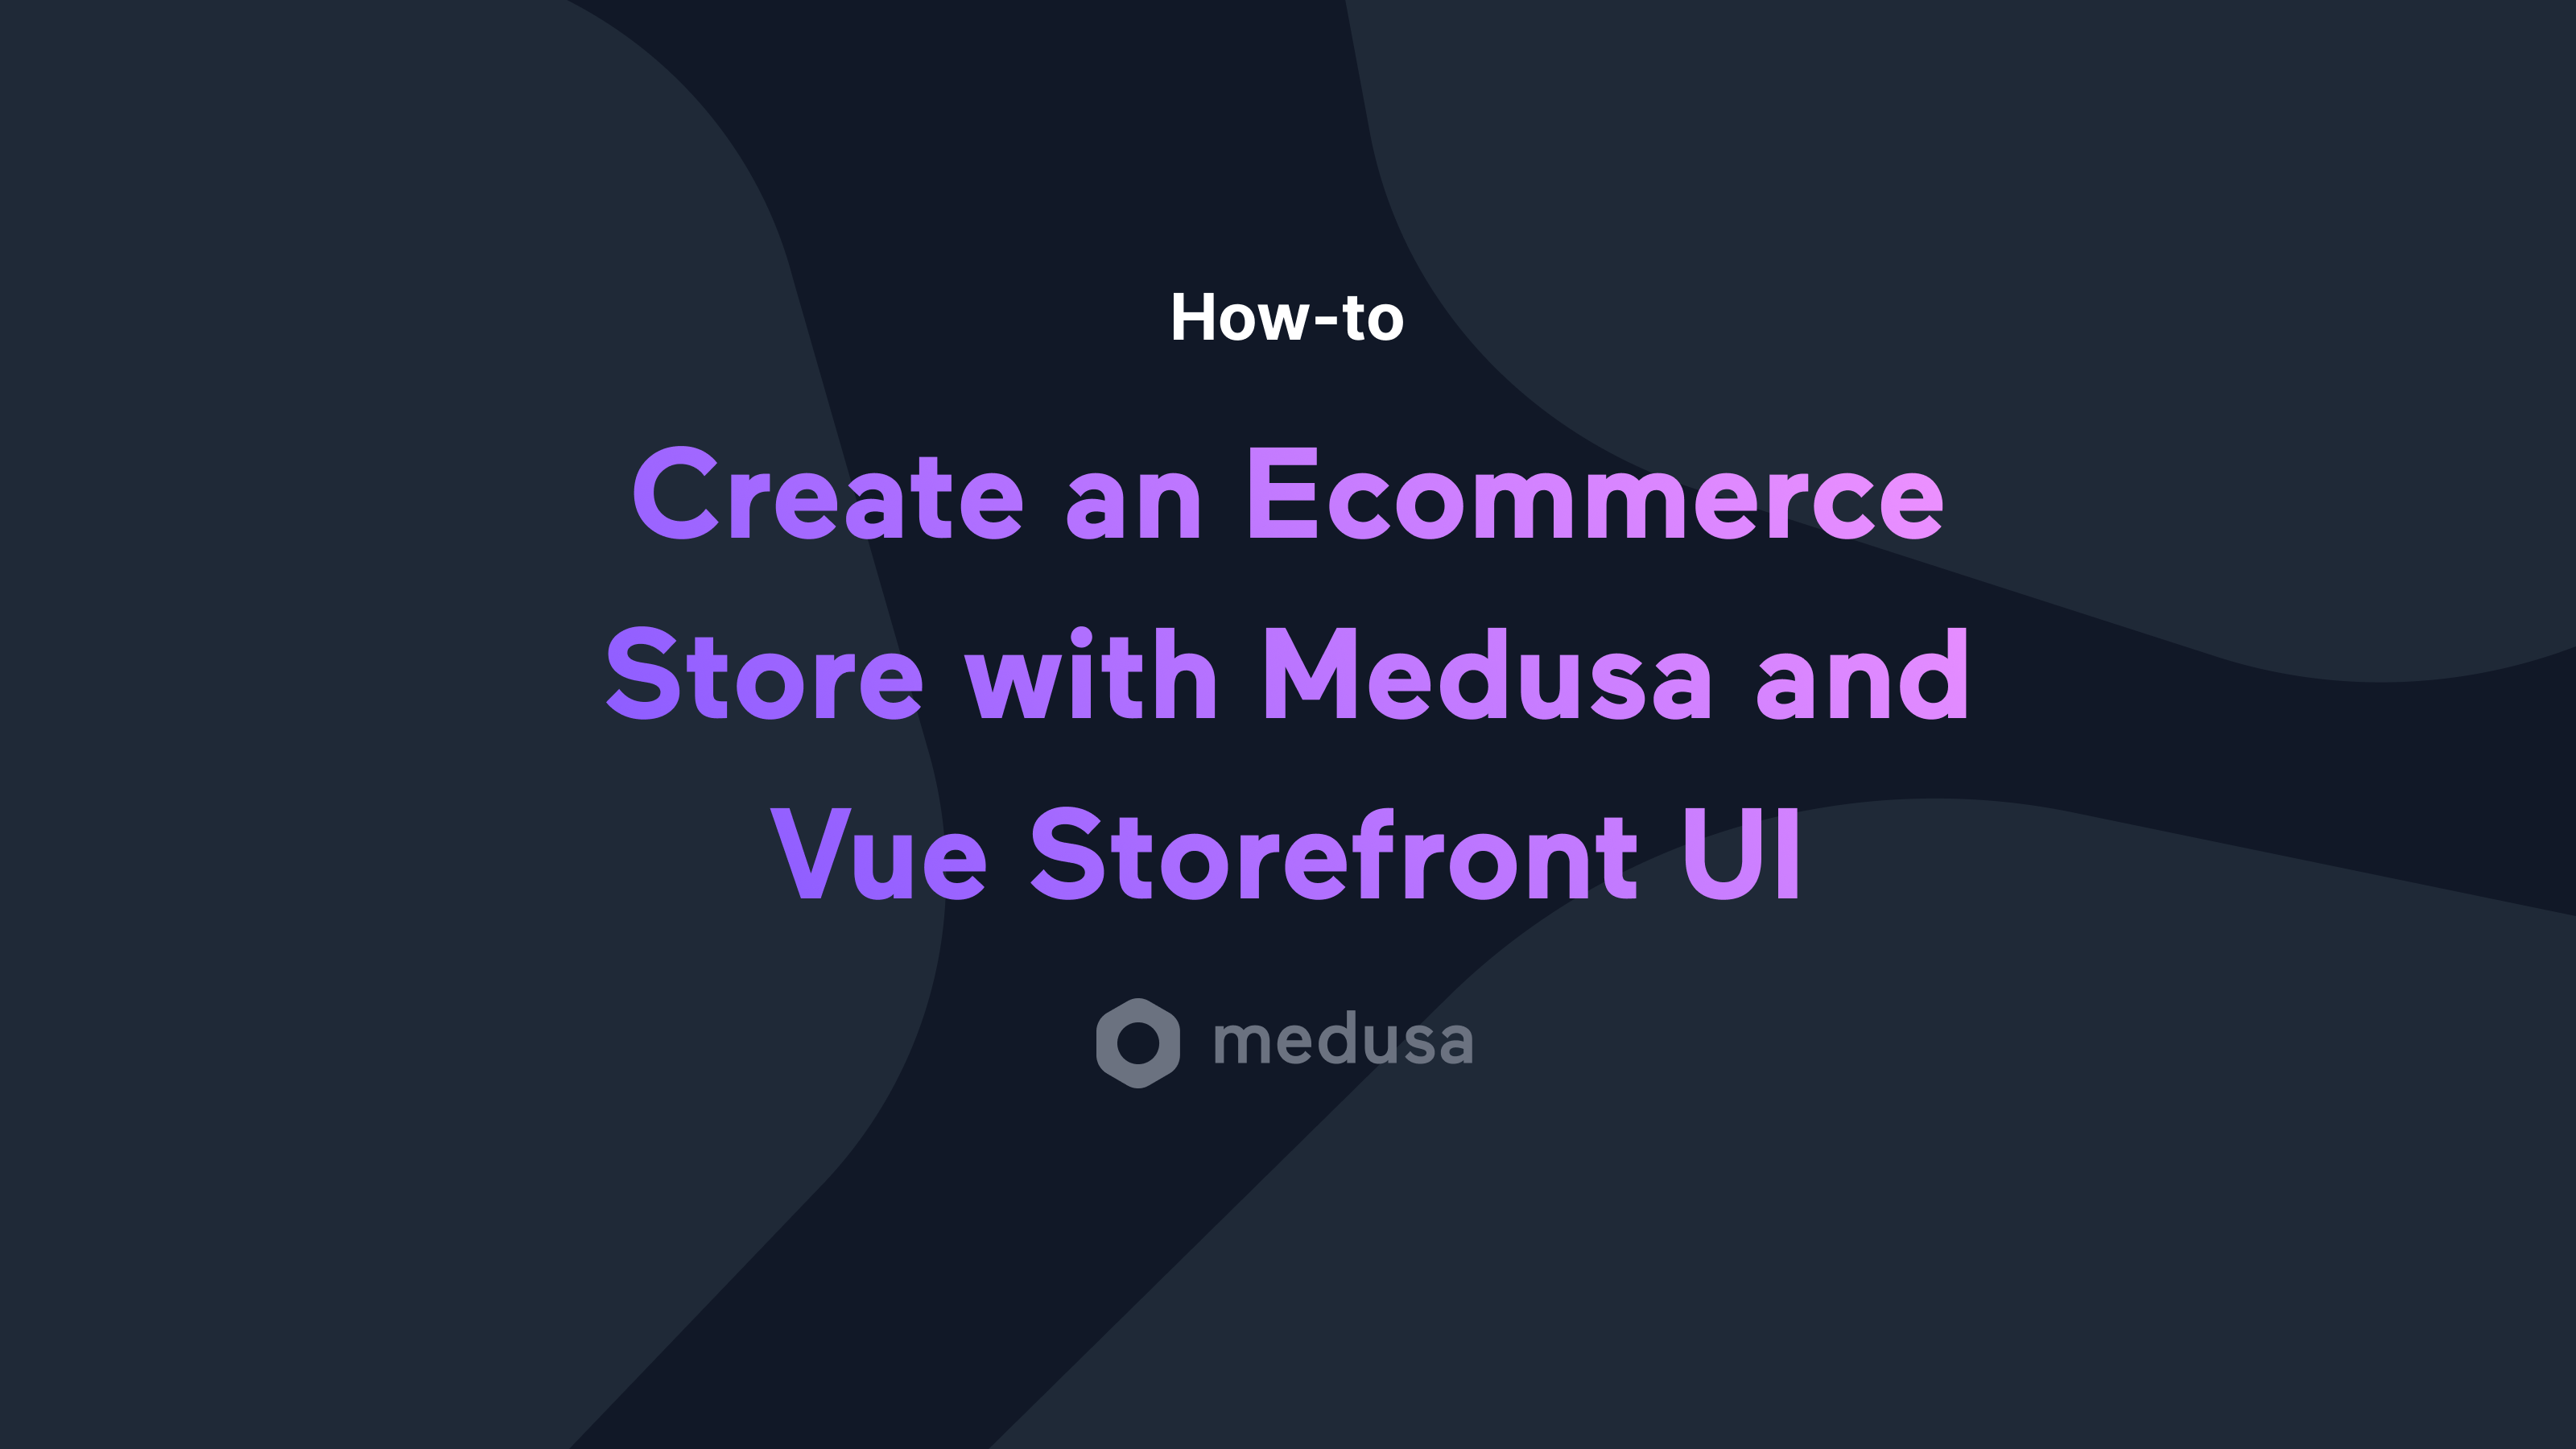 Create a Vue.js Ecommerce Store with Medusa and Vue Storefront UI